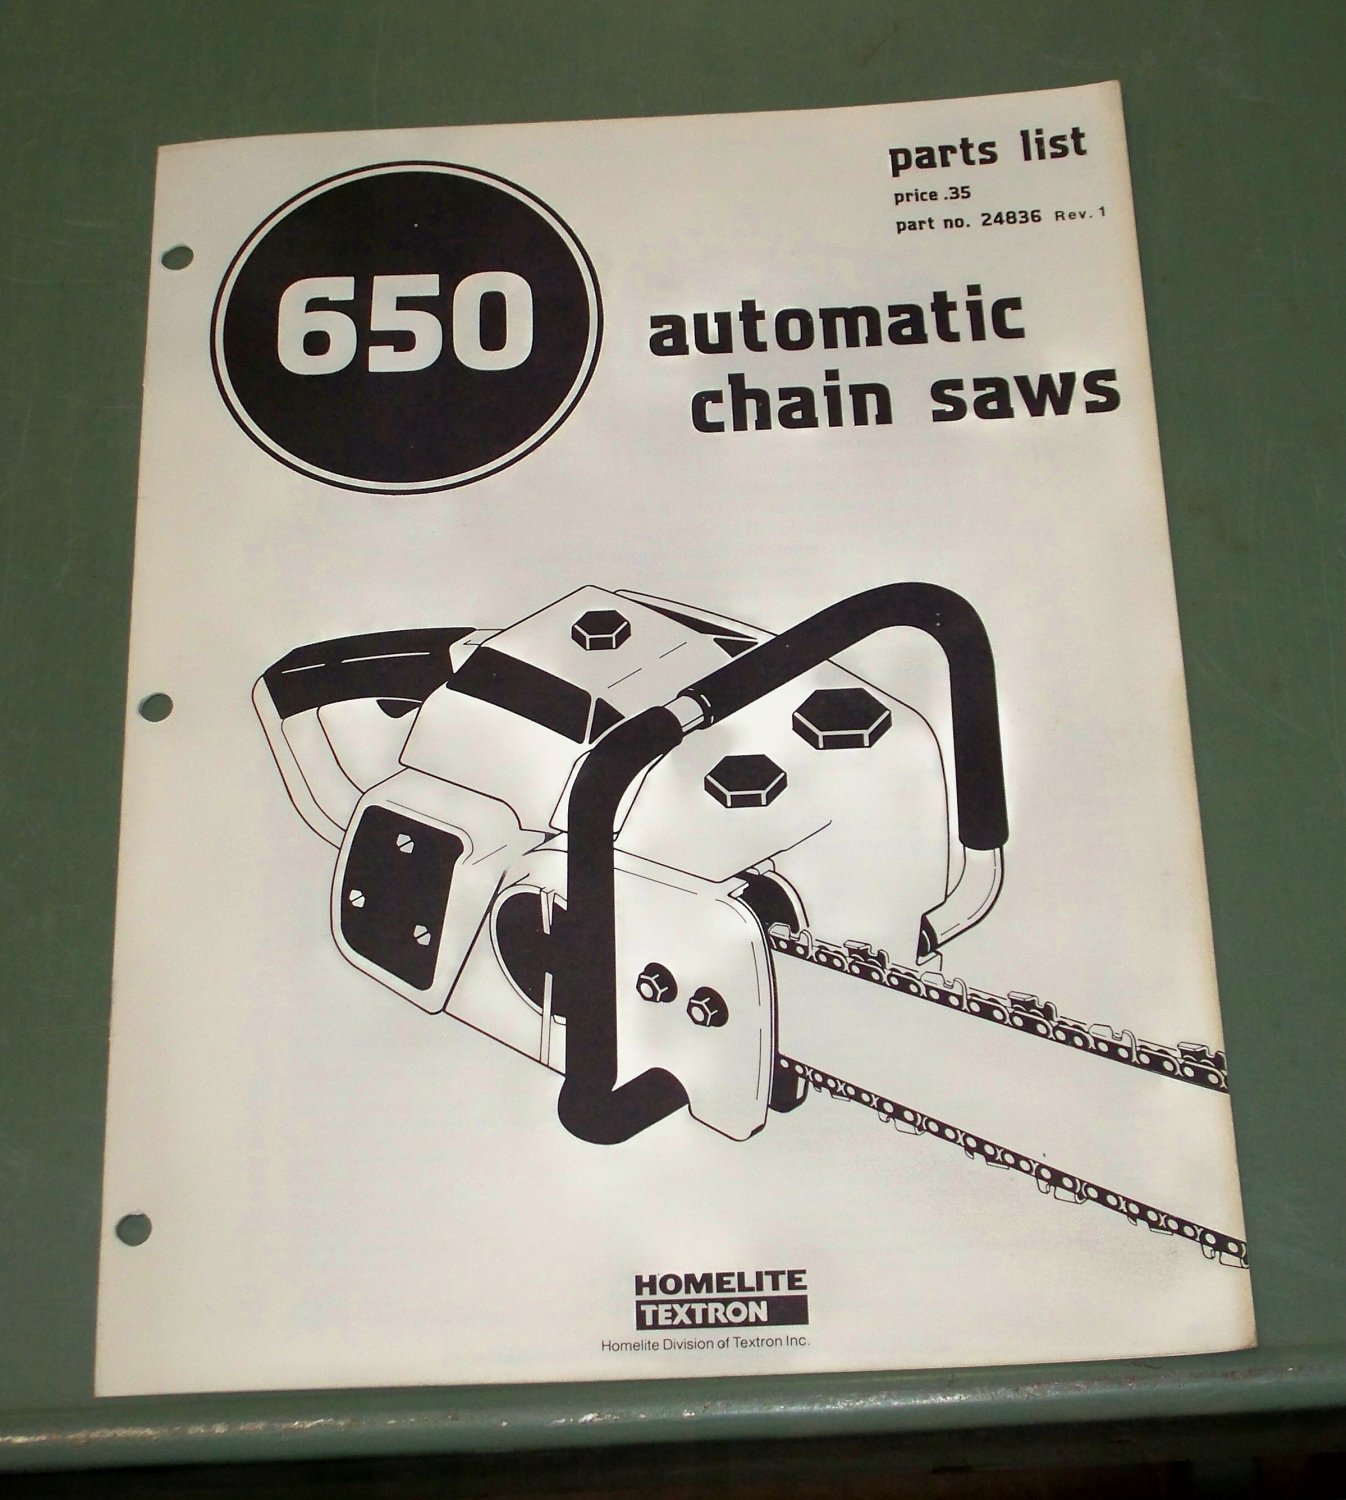 Homelite 650 Automatic Chain Saw Part No. 24836 Rev. 1 Illustrated